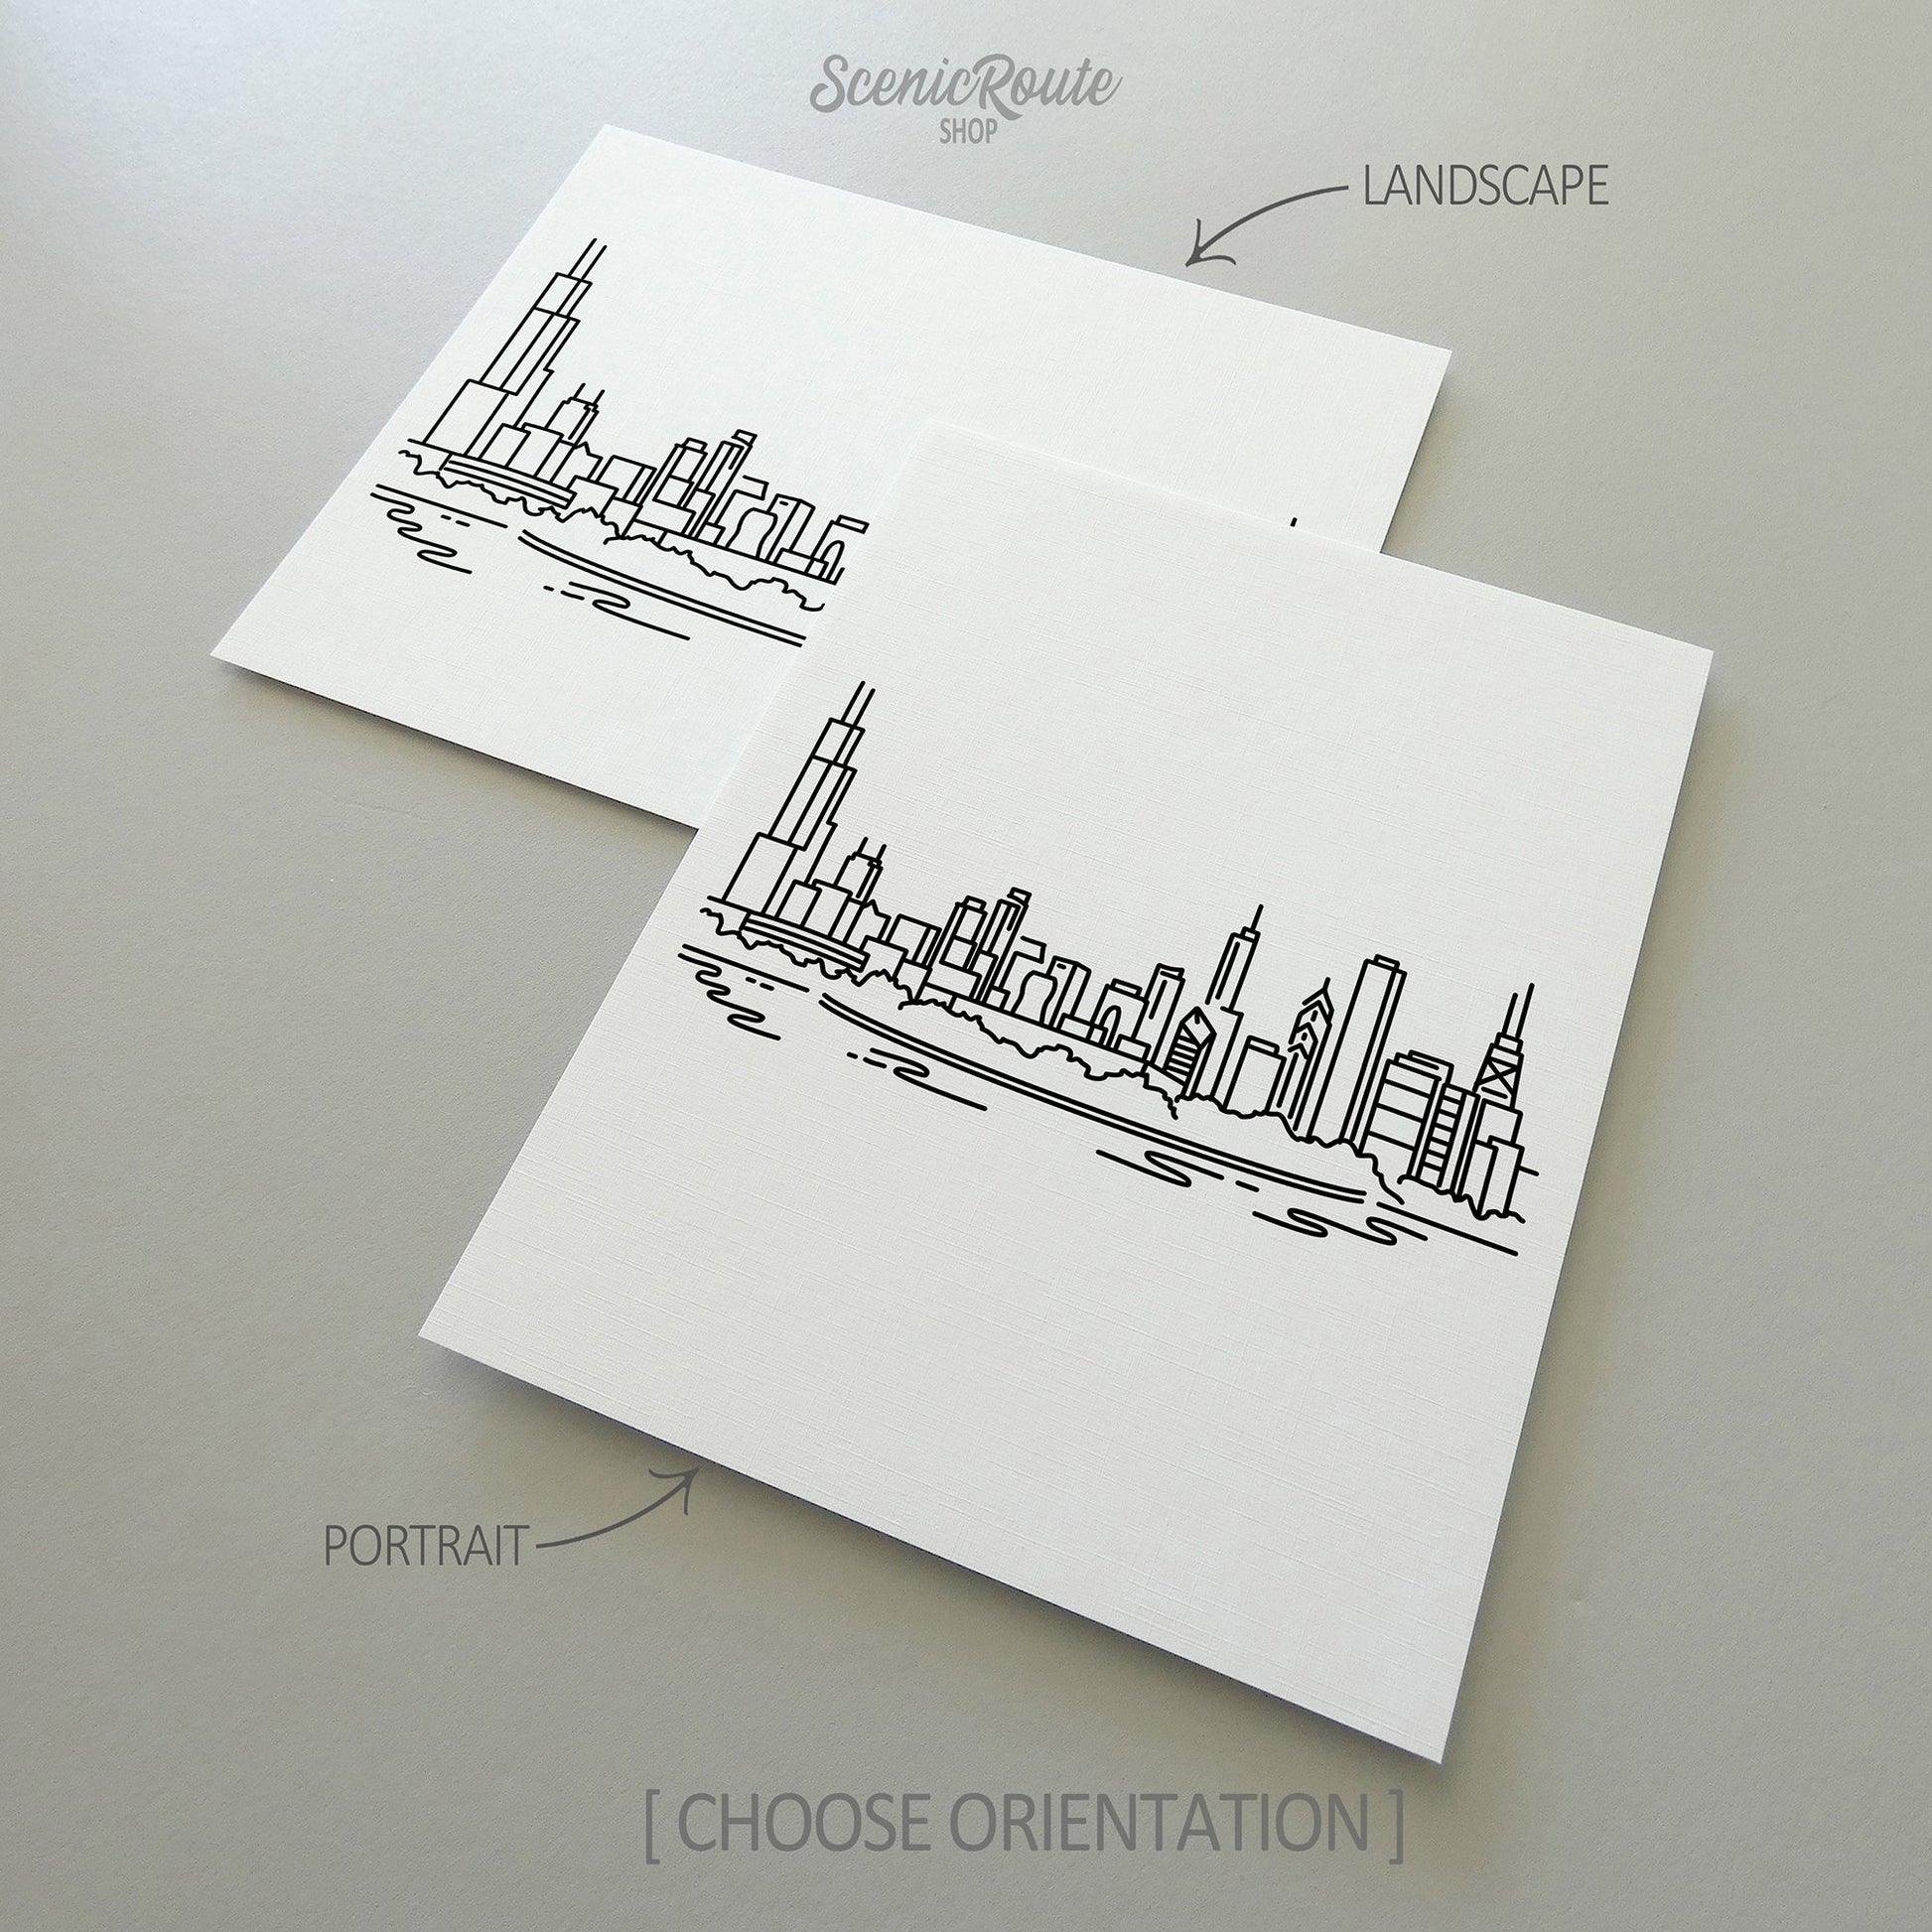 Two line art drawings of the Chicago Skyline on white linen paper with a gray background.  The pieces are shown in portrait and landscape orientation for the available art print options.